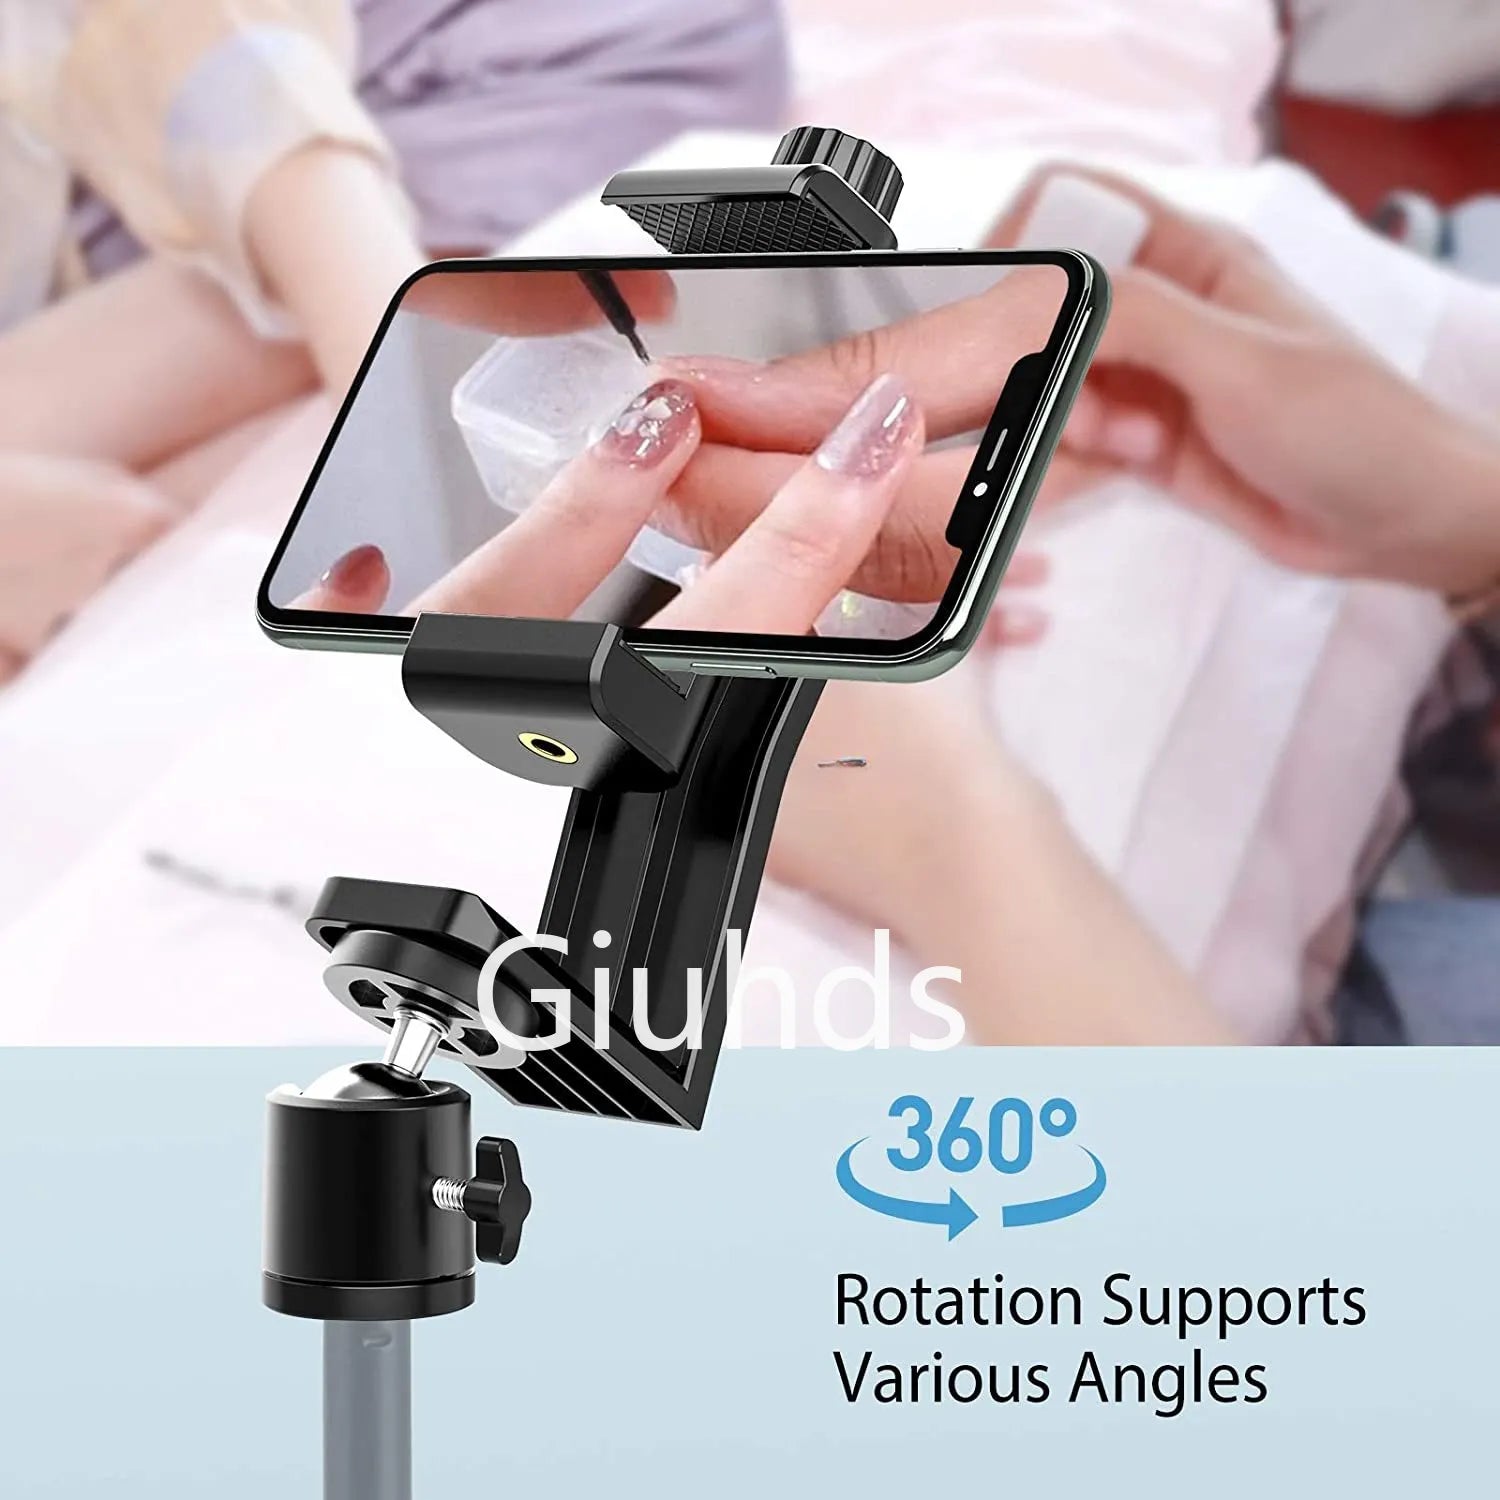 Universal Cell Phone Tripod Mount Adapter Tripod Ball Head 360 Rotatable for Samsung iPhone phone Holder Selfie Stick Monopod